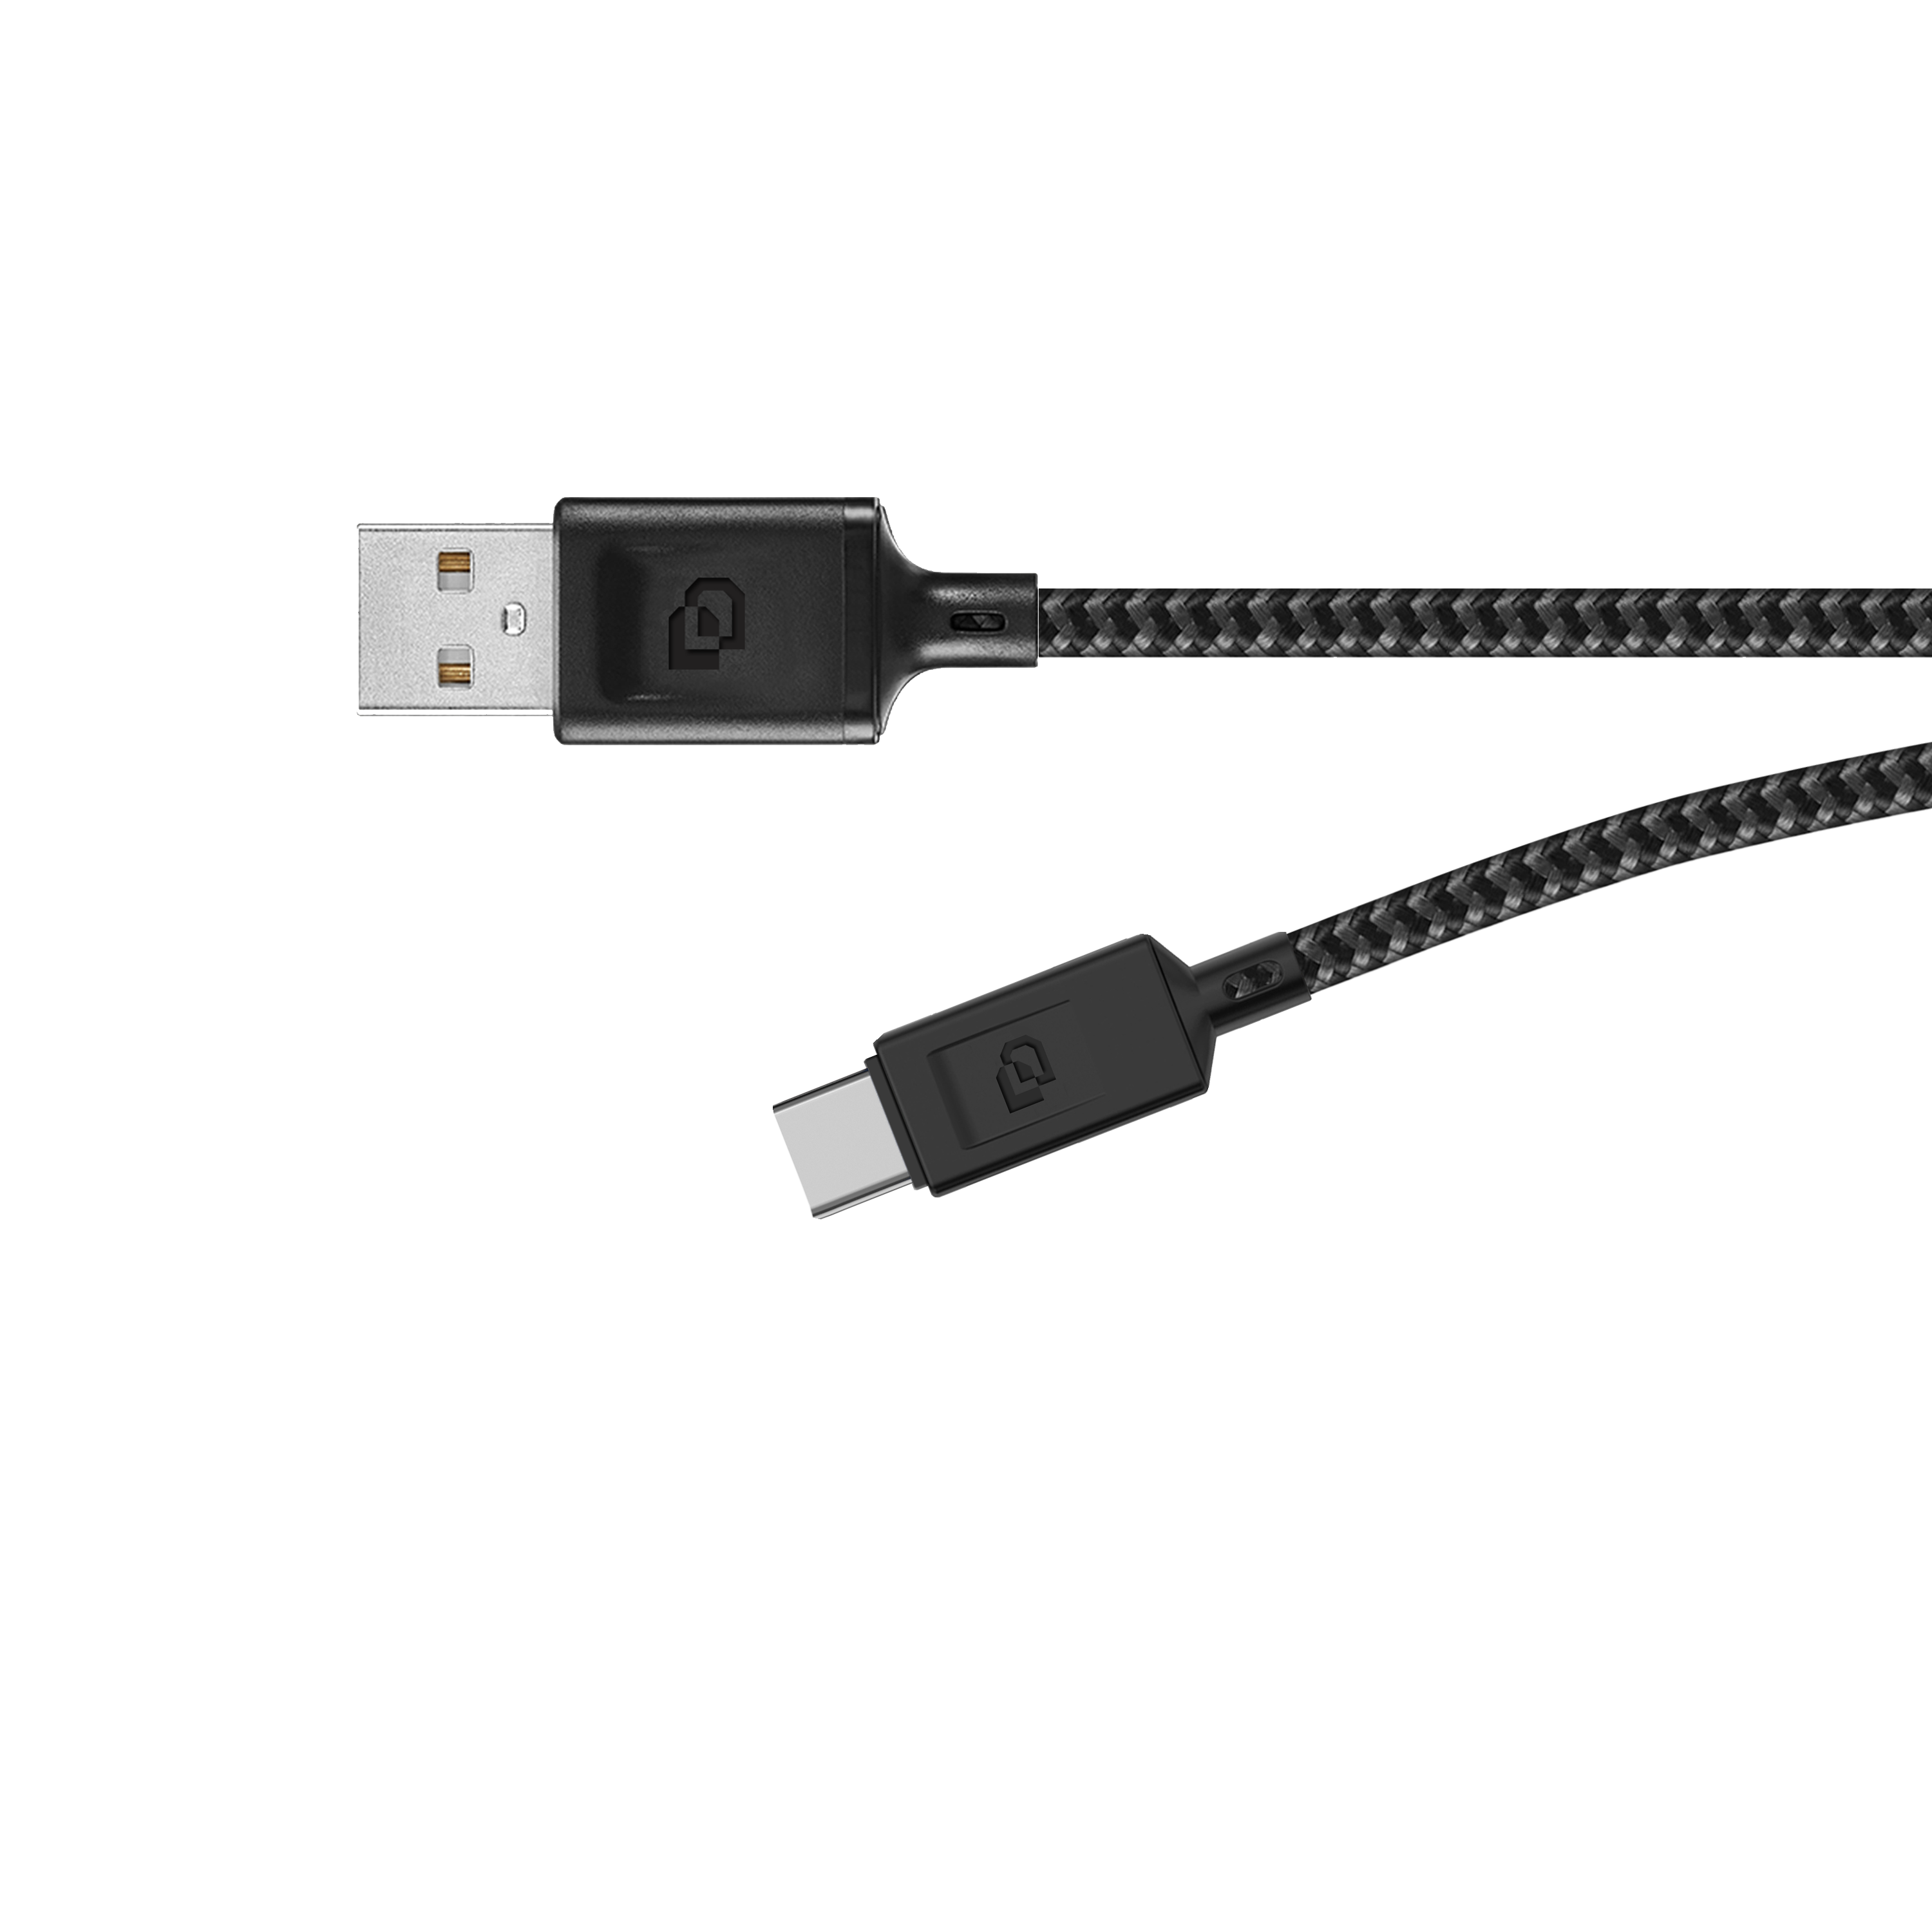  - Cable USB-A a USB-C, USB 2.0, 1.2 Mt Rugged Dusted negro 1